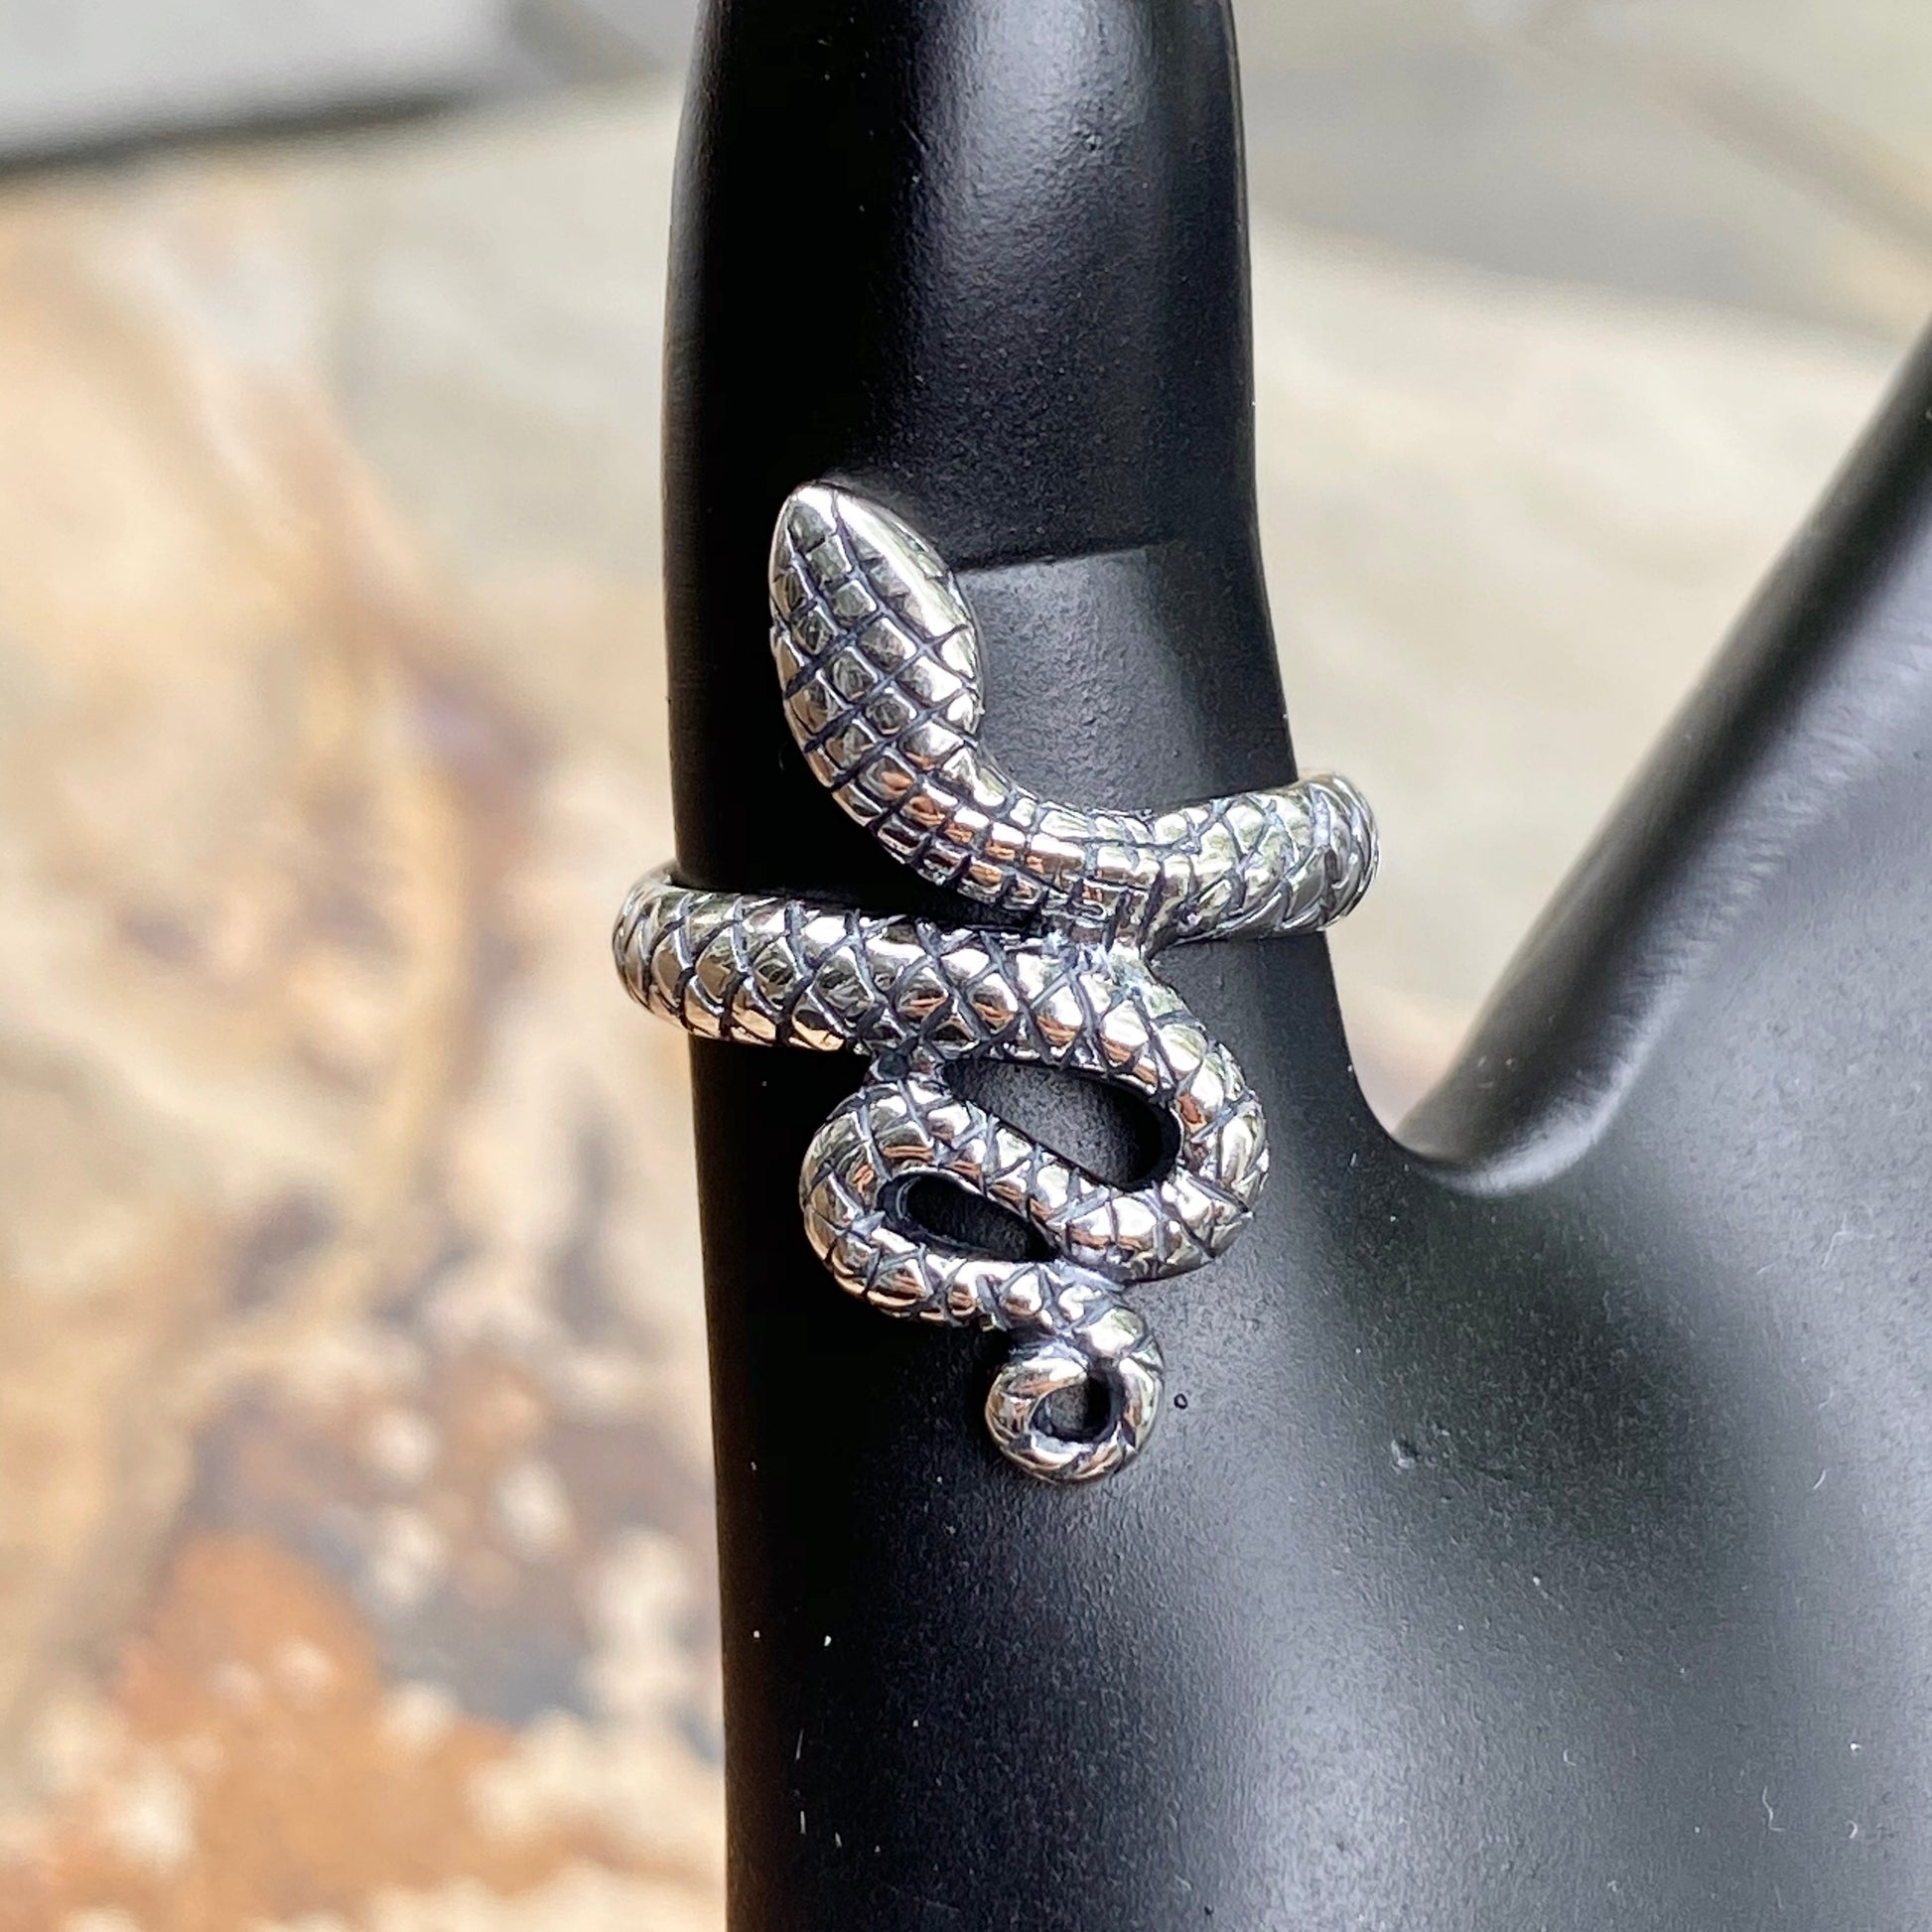 Sterling Silver Antiqued Snake Bypass Toe Ring, Sterling Silver Antiqued Snake Bypass Toe Ring - Legacy Saint Jewelry